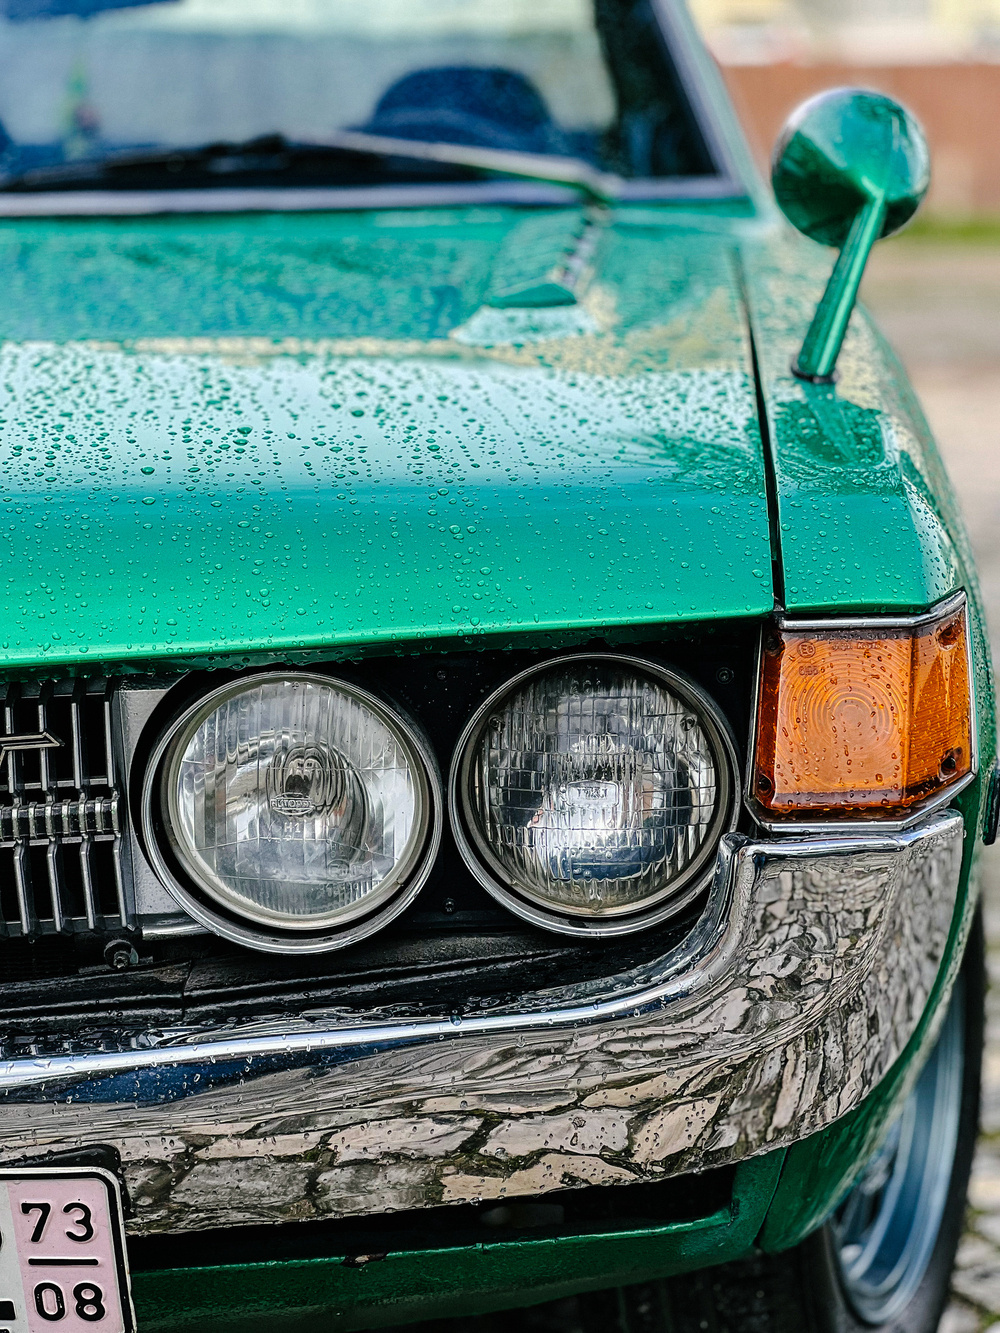 A close-up of a green vintage car&rsquo;s front section with a focus on the grille, headlamps, and turn signal, covered in raindrops.